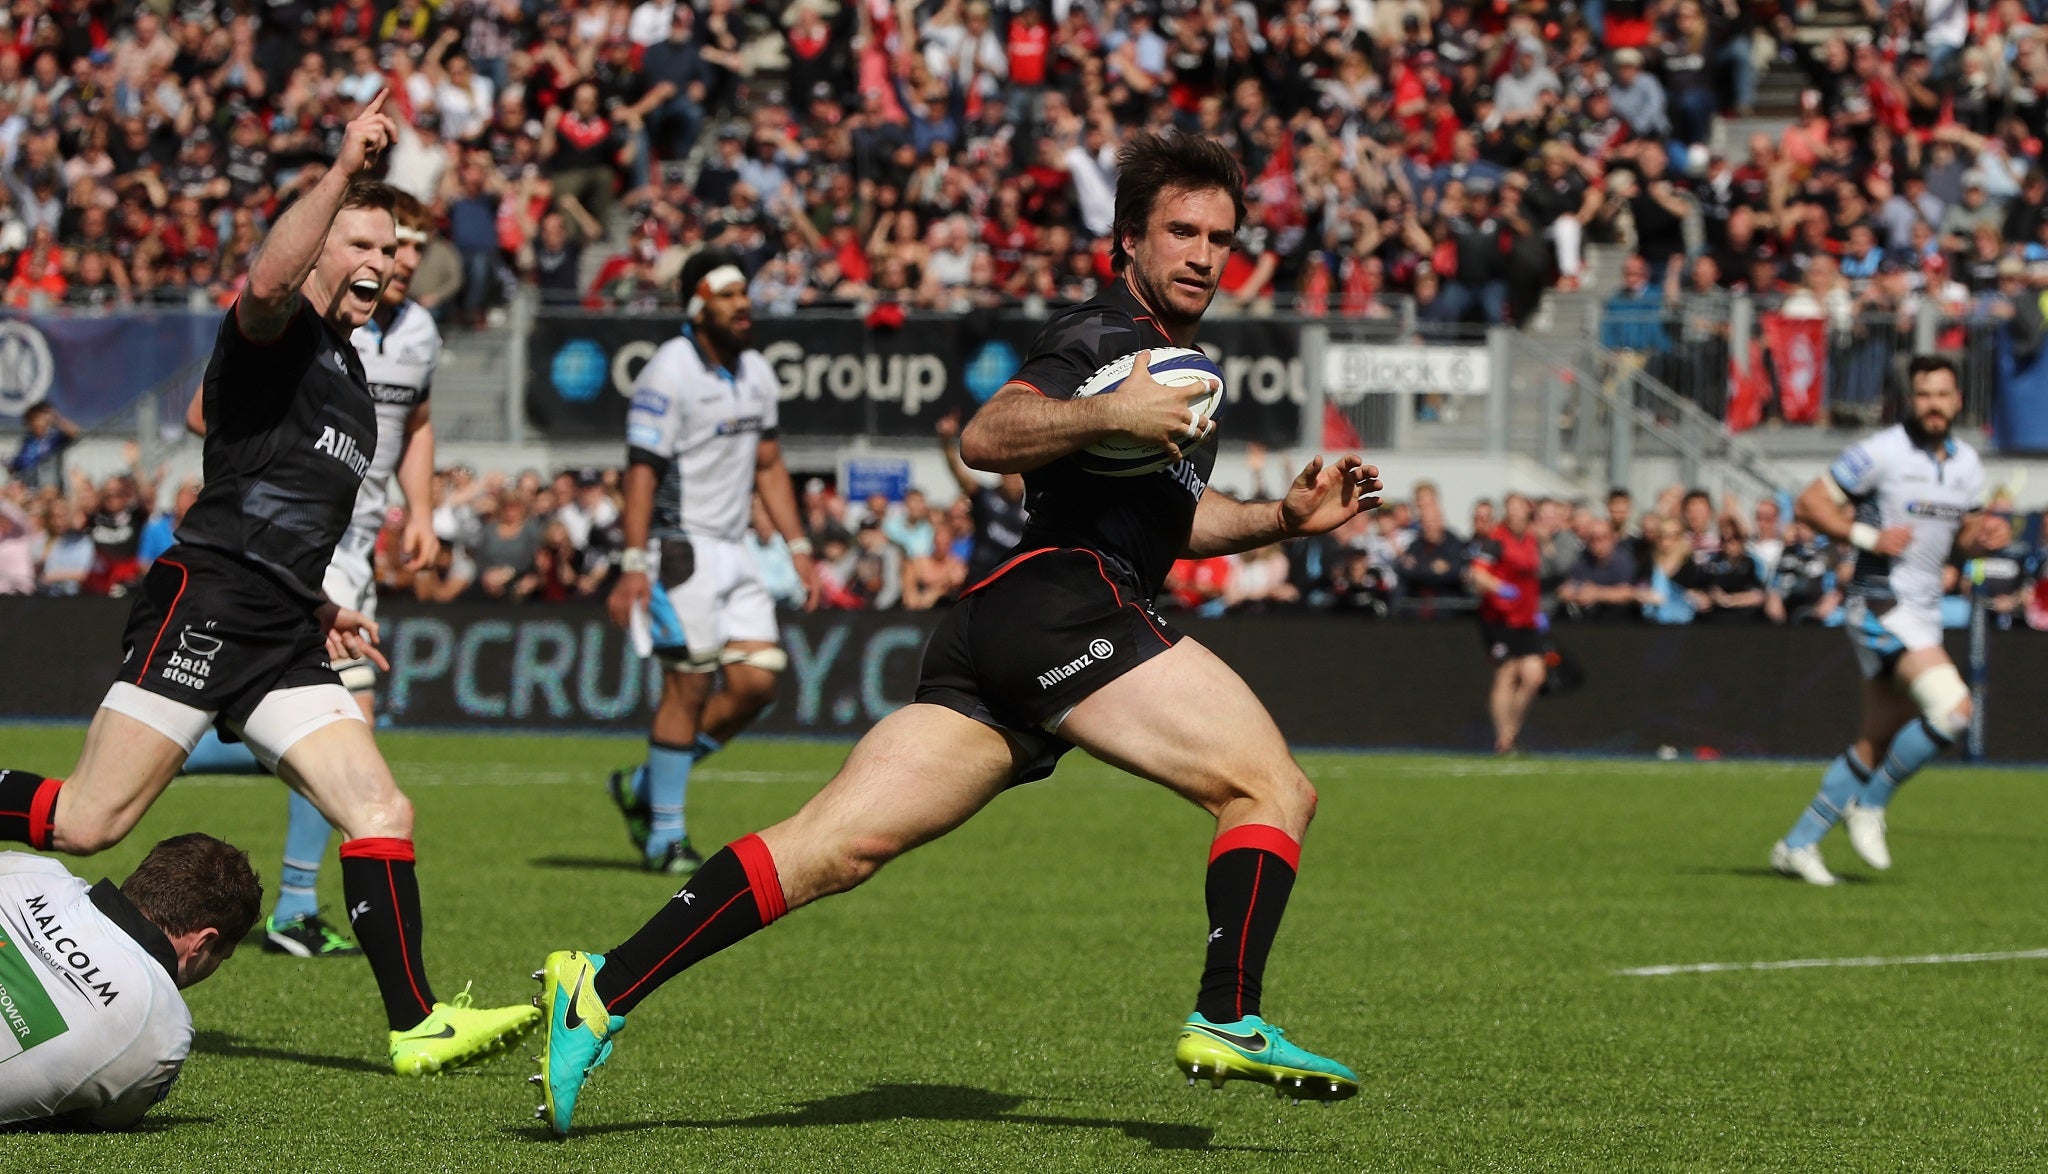 Saracens reached the semi-finals of the European Champions Cup with a 38-13 victory over Glasgow Warriors